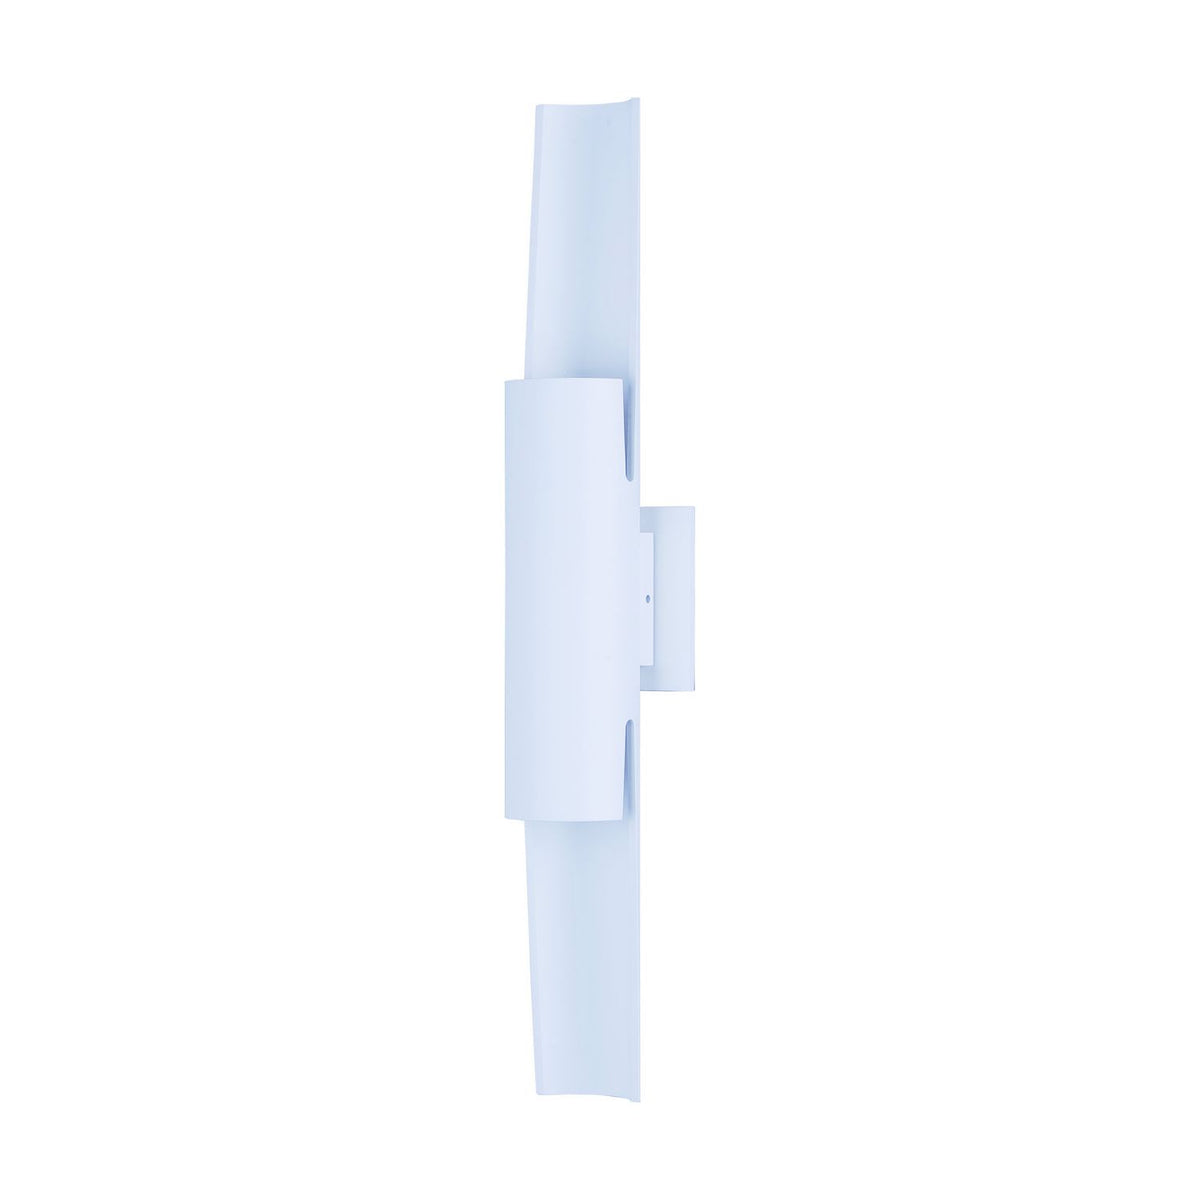 ET2 - E41526-WT - LED Outdoor Wall Sconce - Alumilux Runway - White